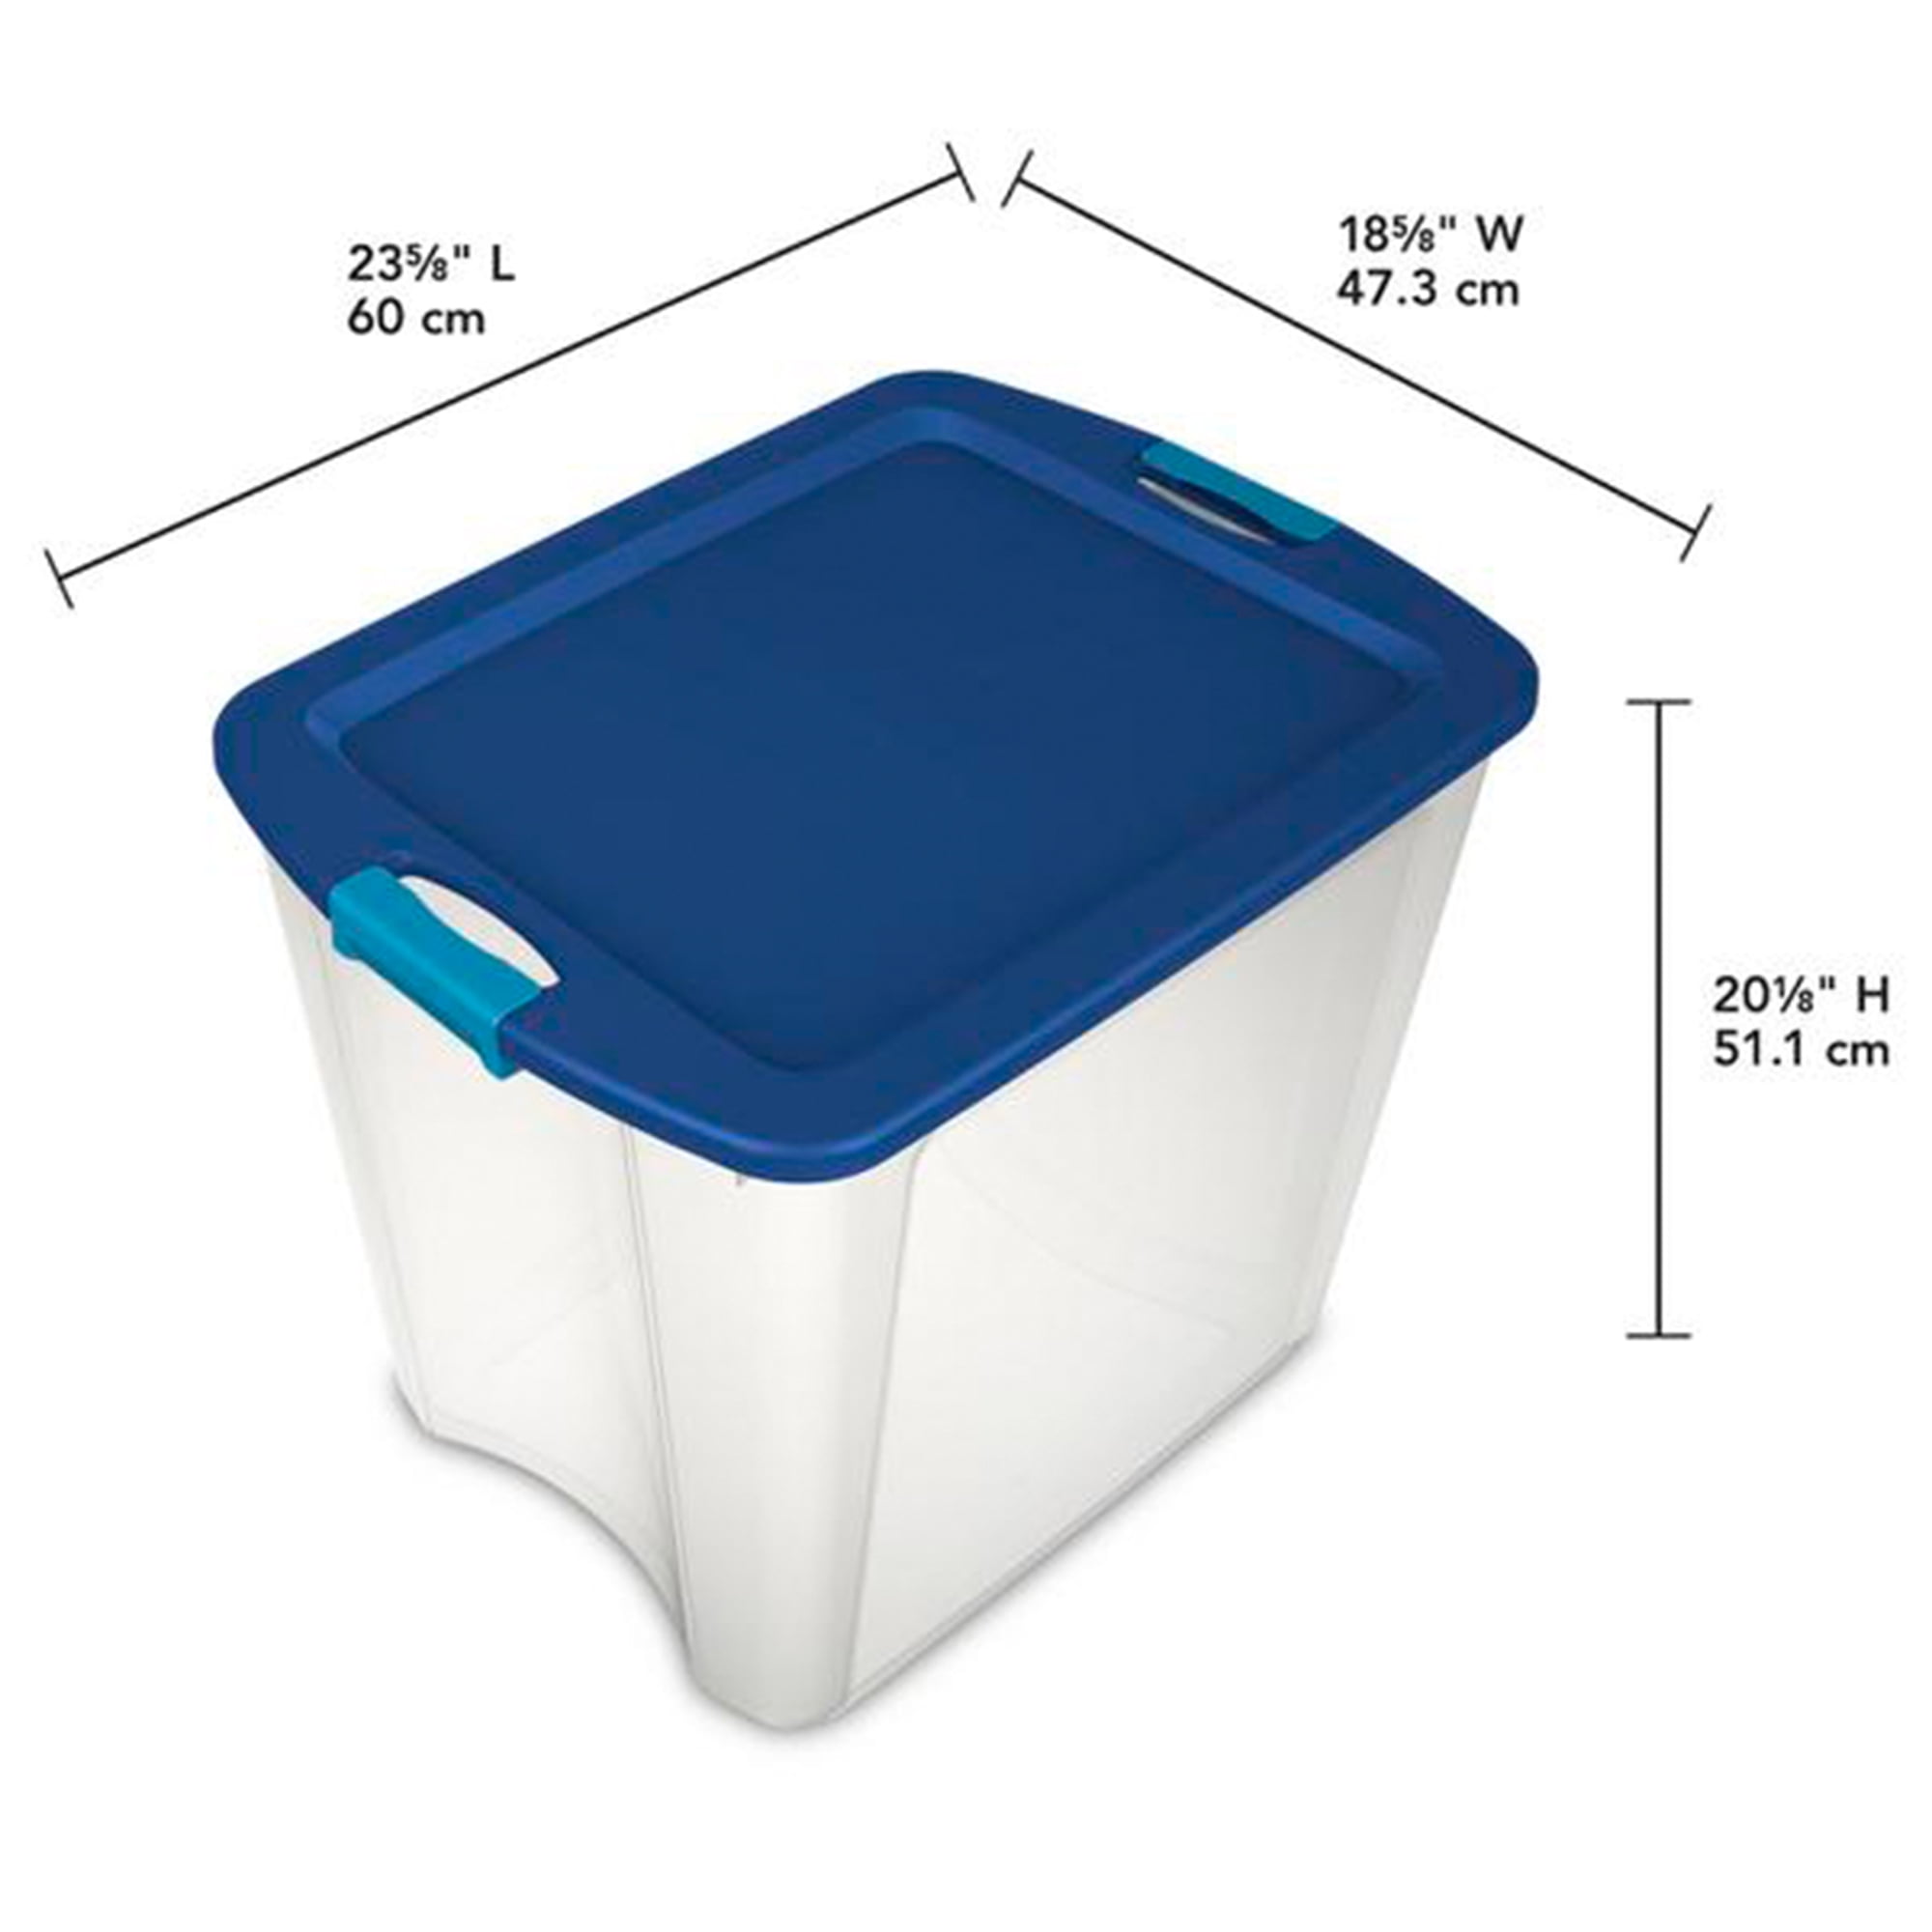 Sterilite Corporation 12-Pack Small 1.5-Gallons (6-Quart) Clear Tote with  Latching Lid in the Plastic Storage Containers department at